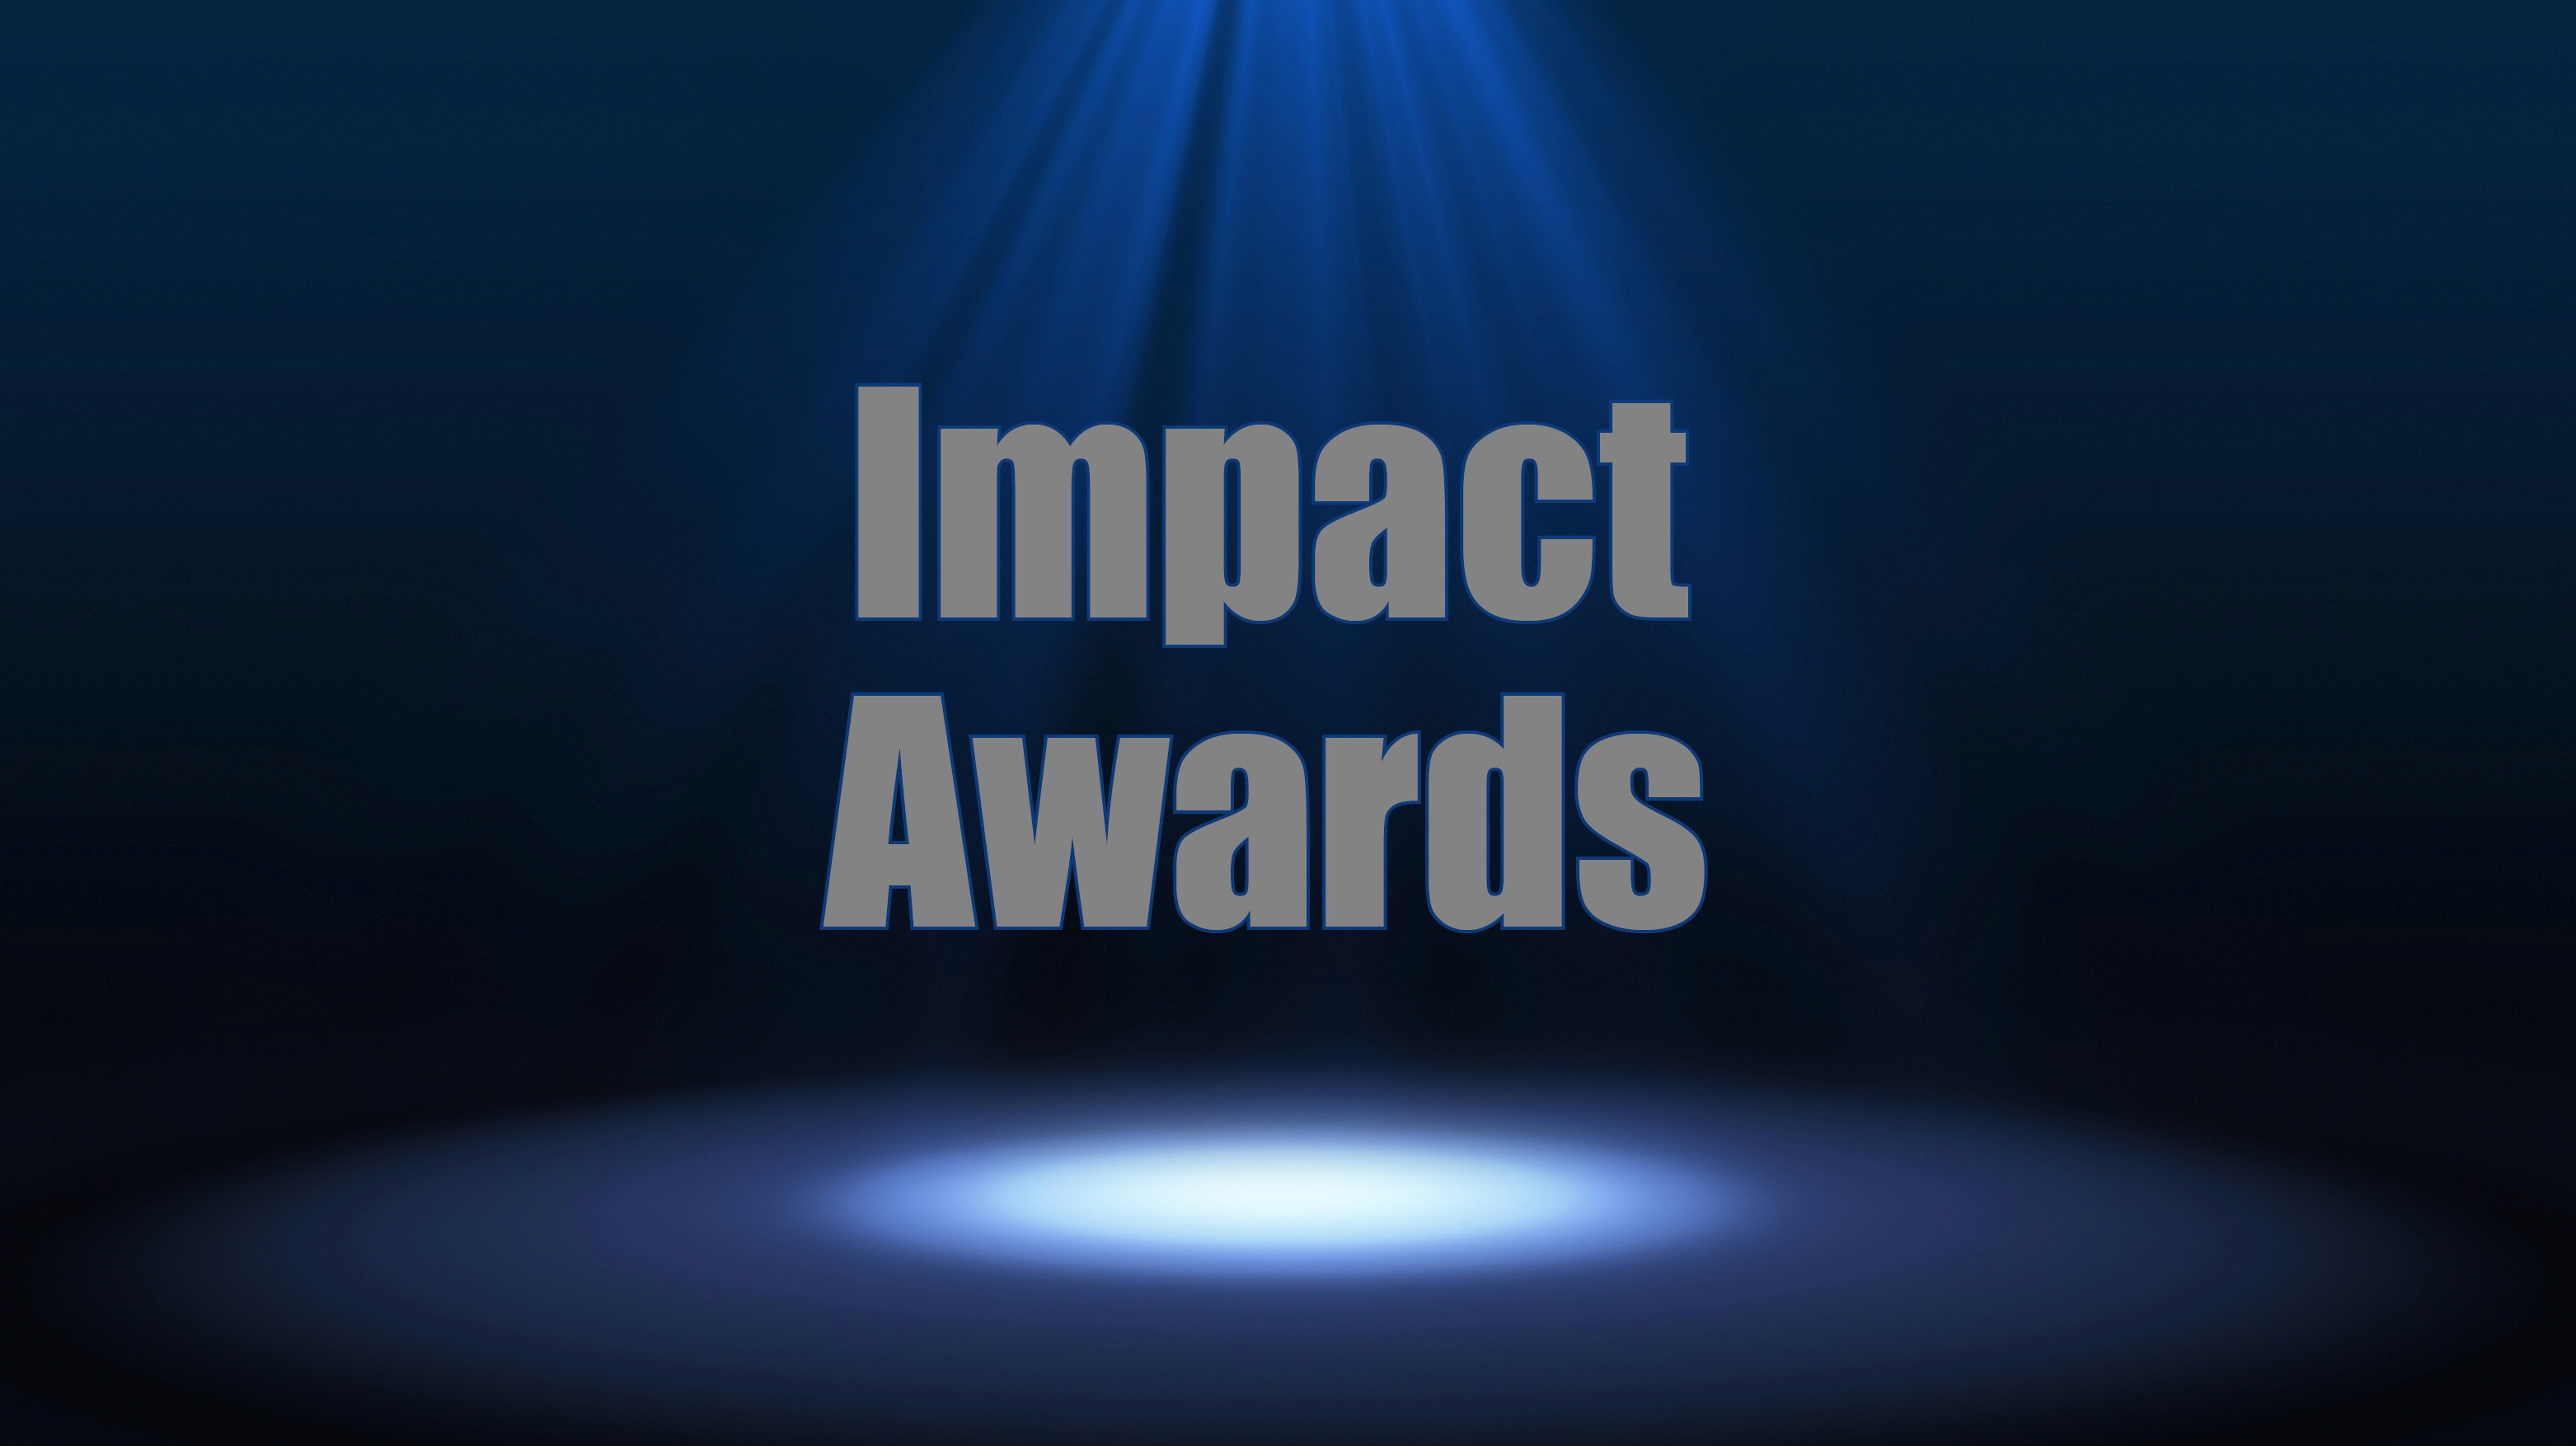 Fort Carson Impact Awards Ft. Carson US Army MWR